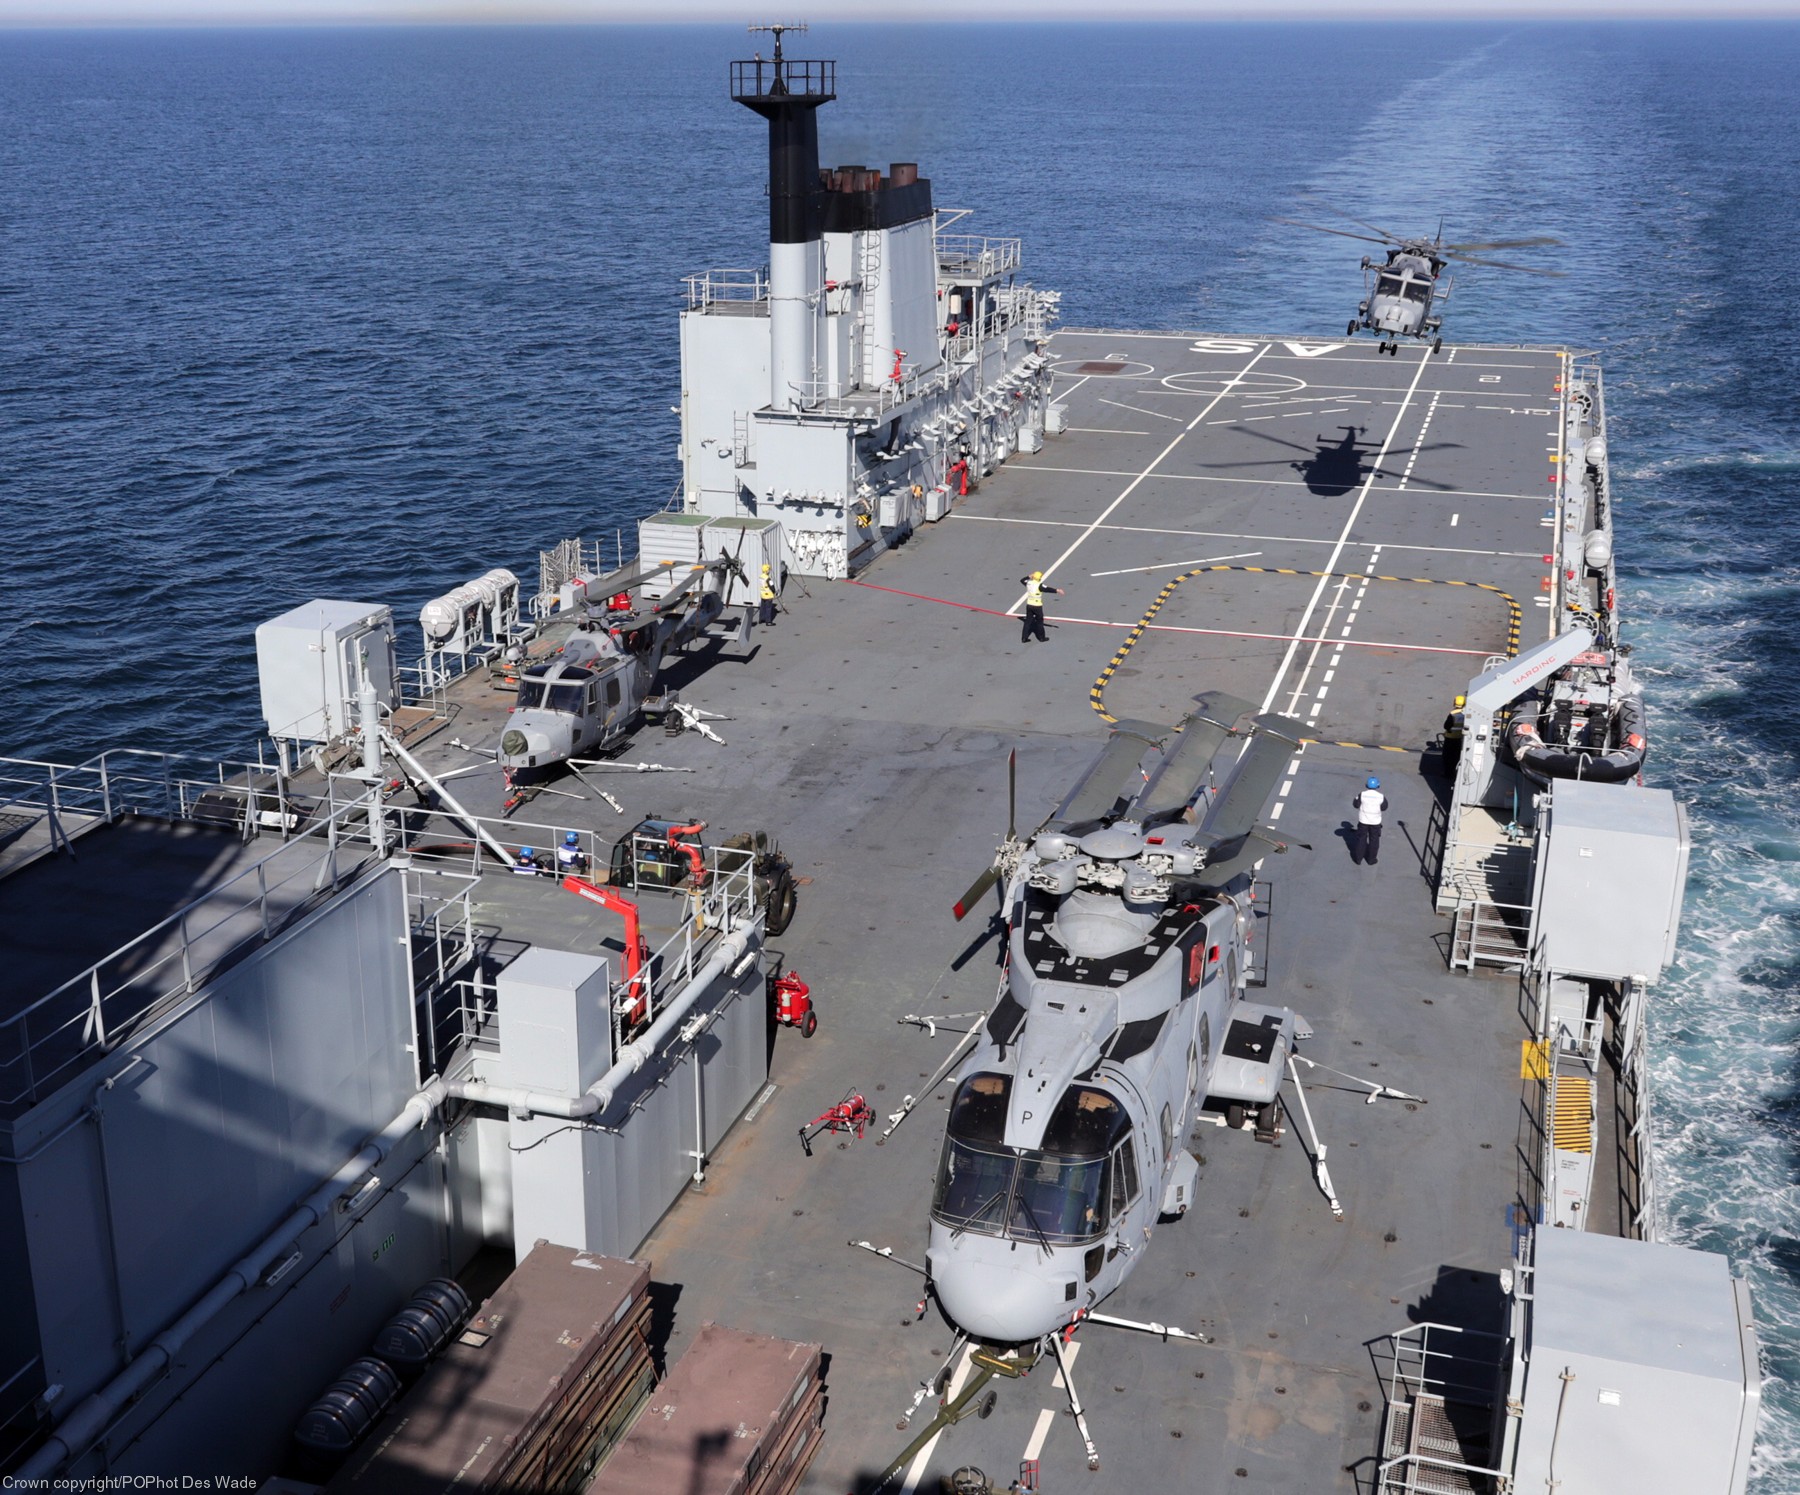 a 135 rfa argus casualty receiving ship support royal fleet auxilary navy 18 flight deck merlin helicopter